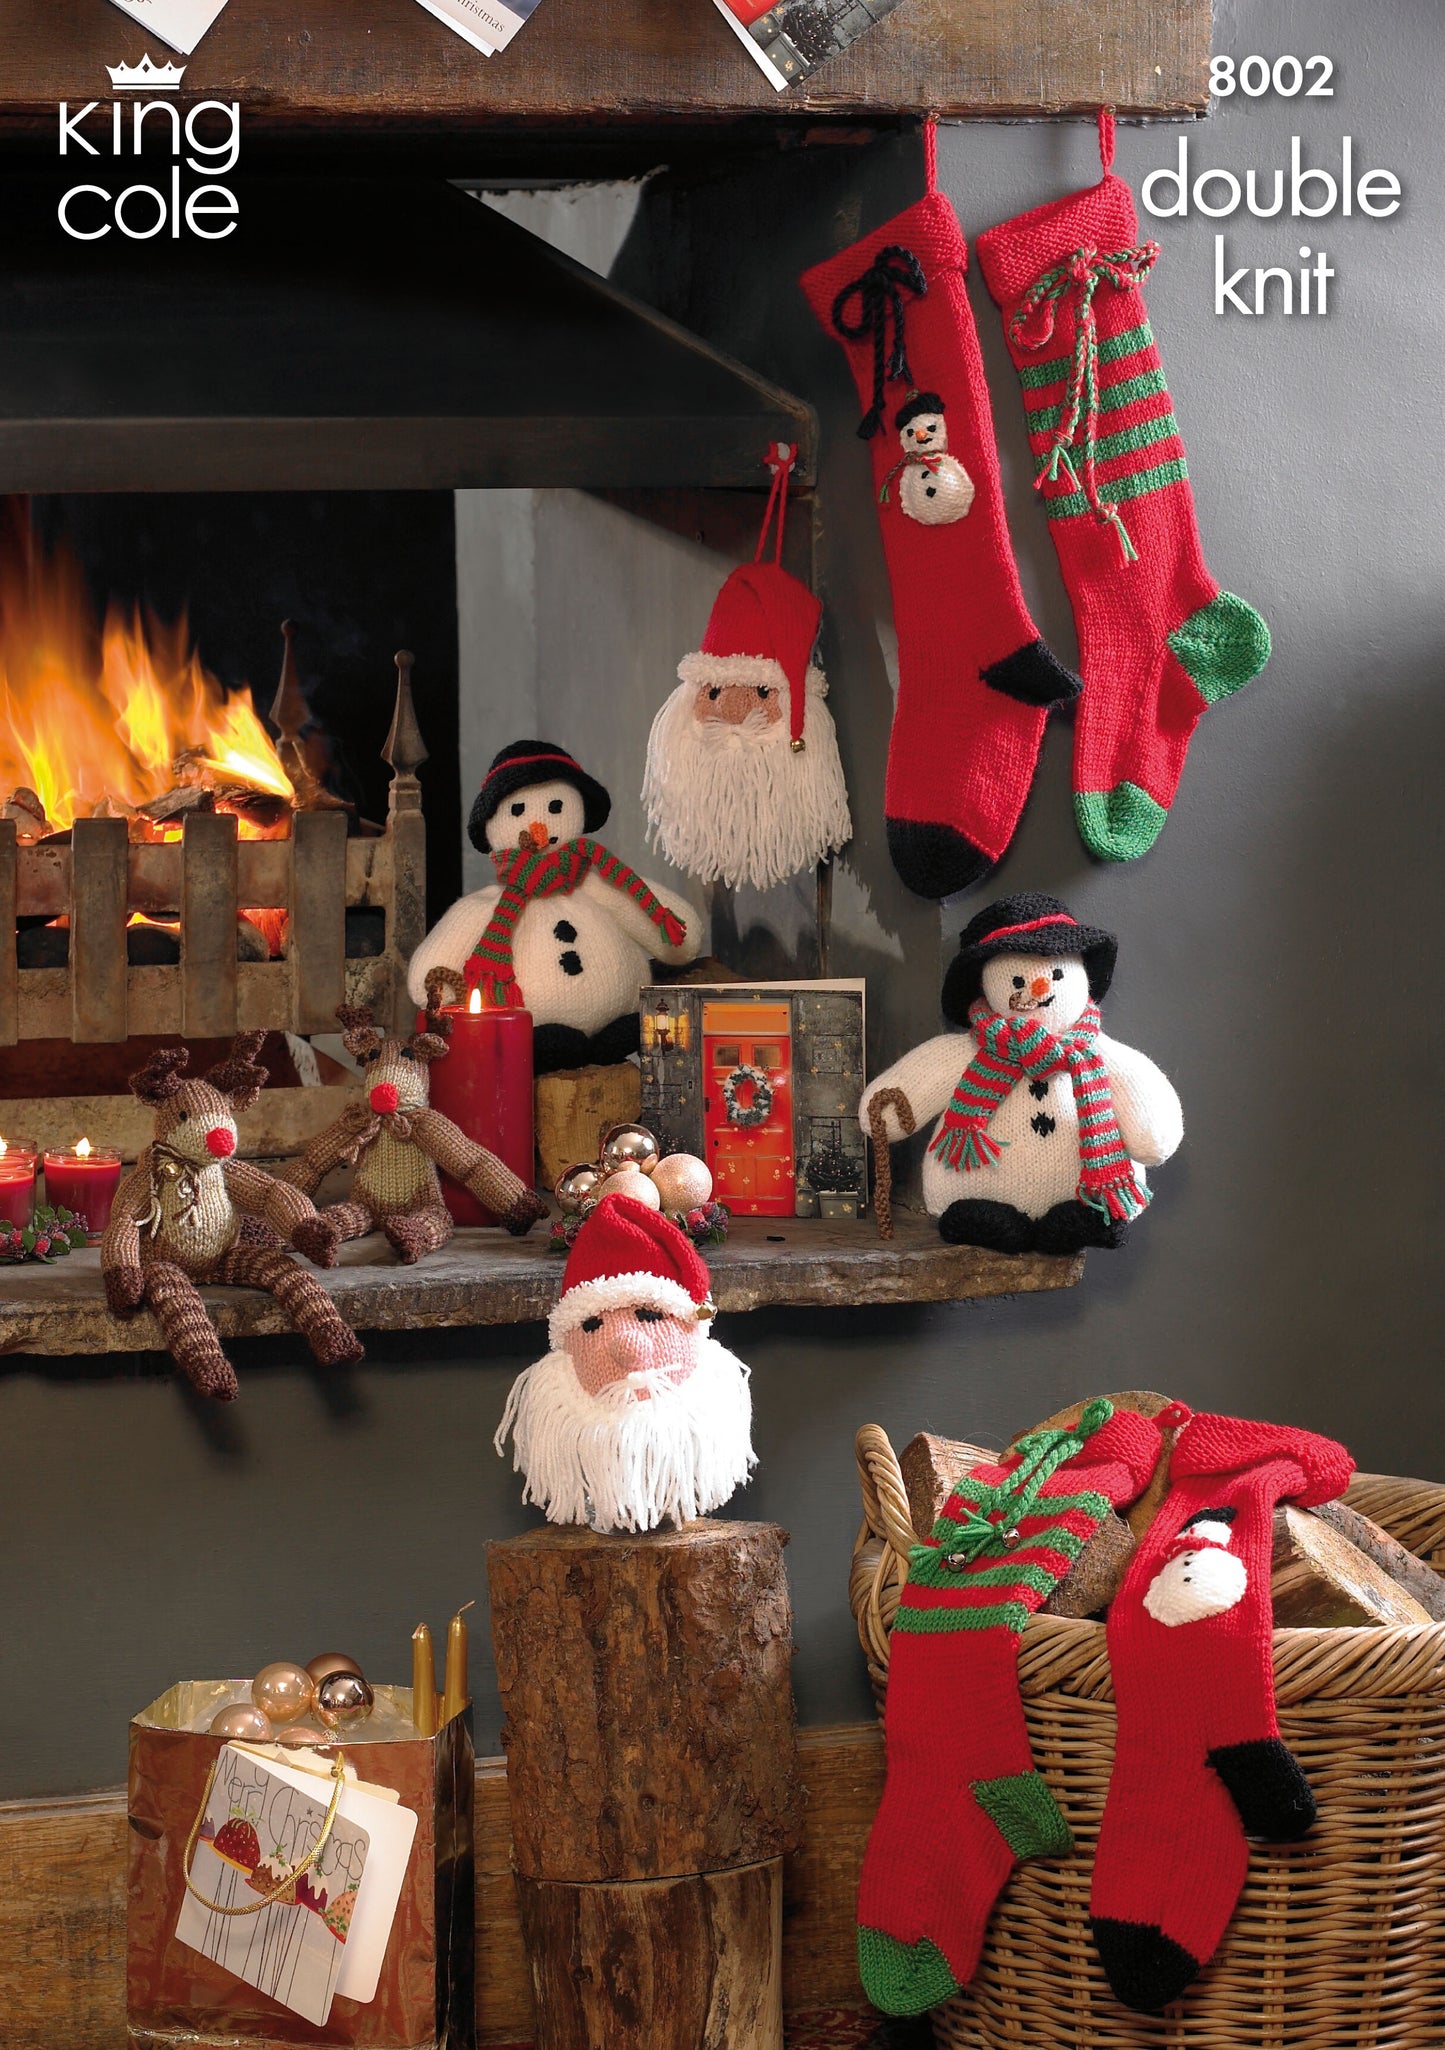 Knitting Pattern 8002 - Snowman, Santa Head, Rudolf and Christmas Stockings Knitted with Various King Cole DK